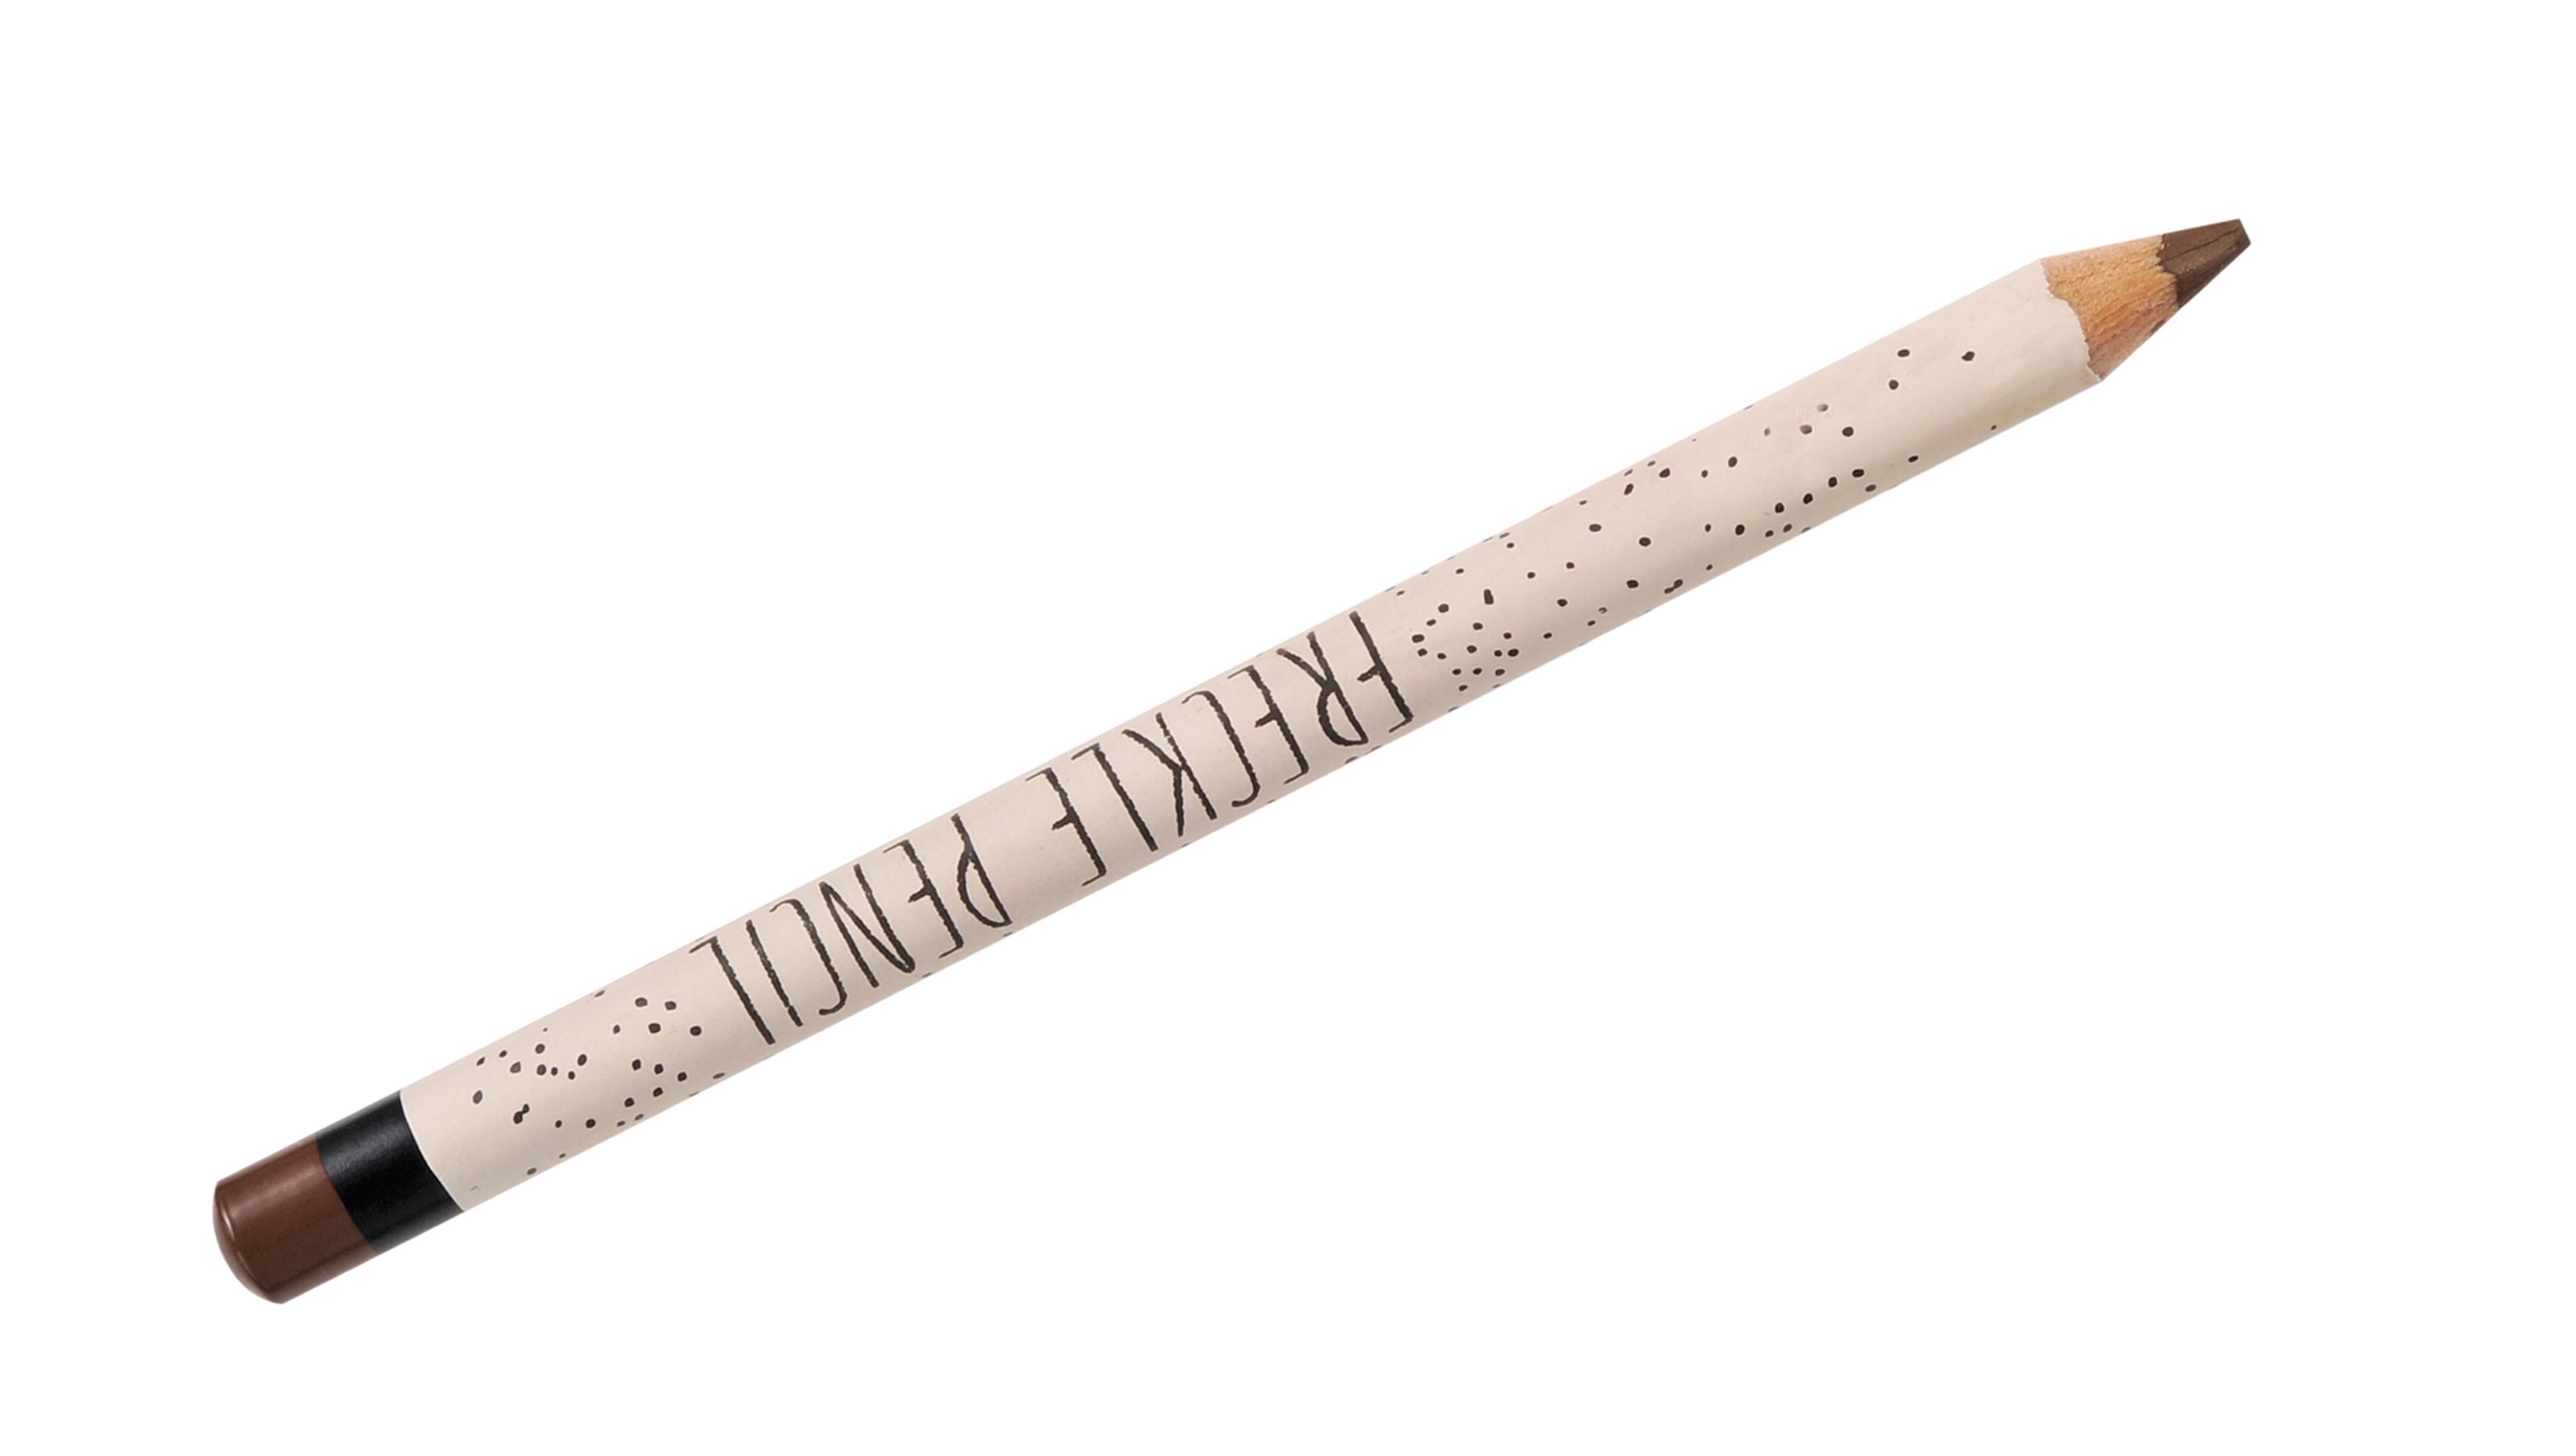 Perfect your freckles with Topshop's new pencil